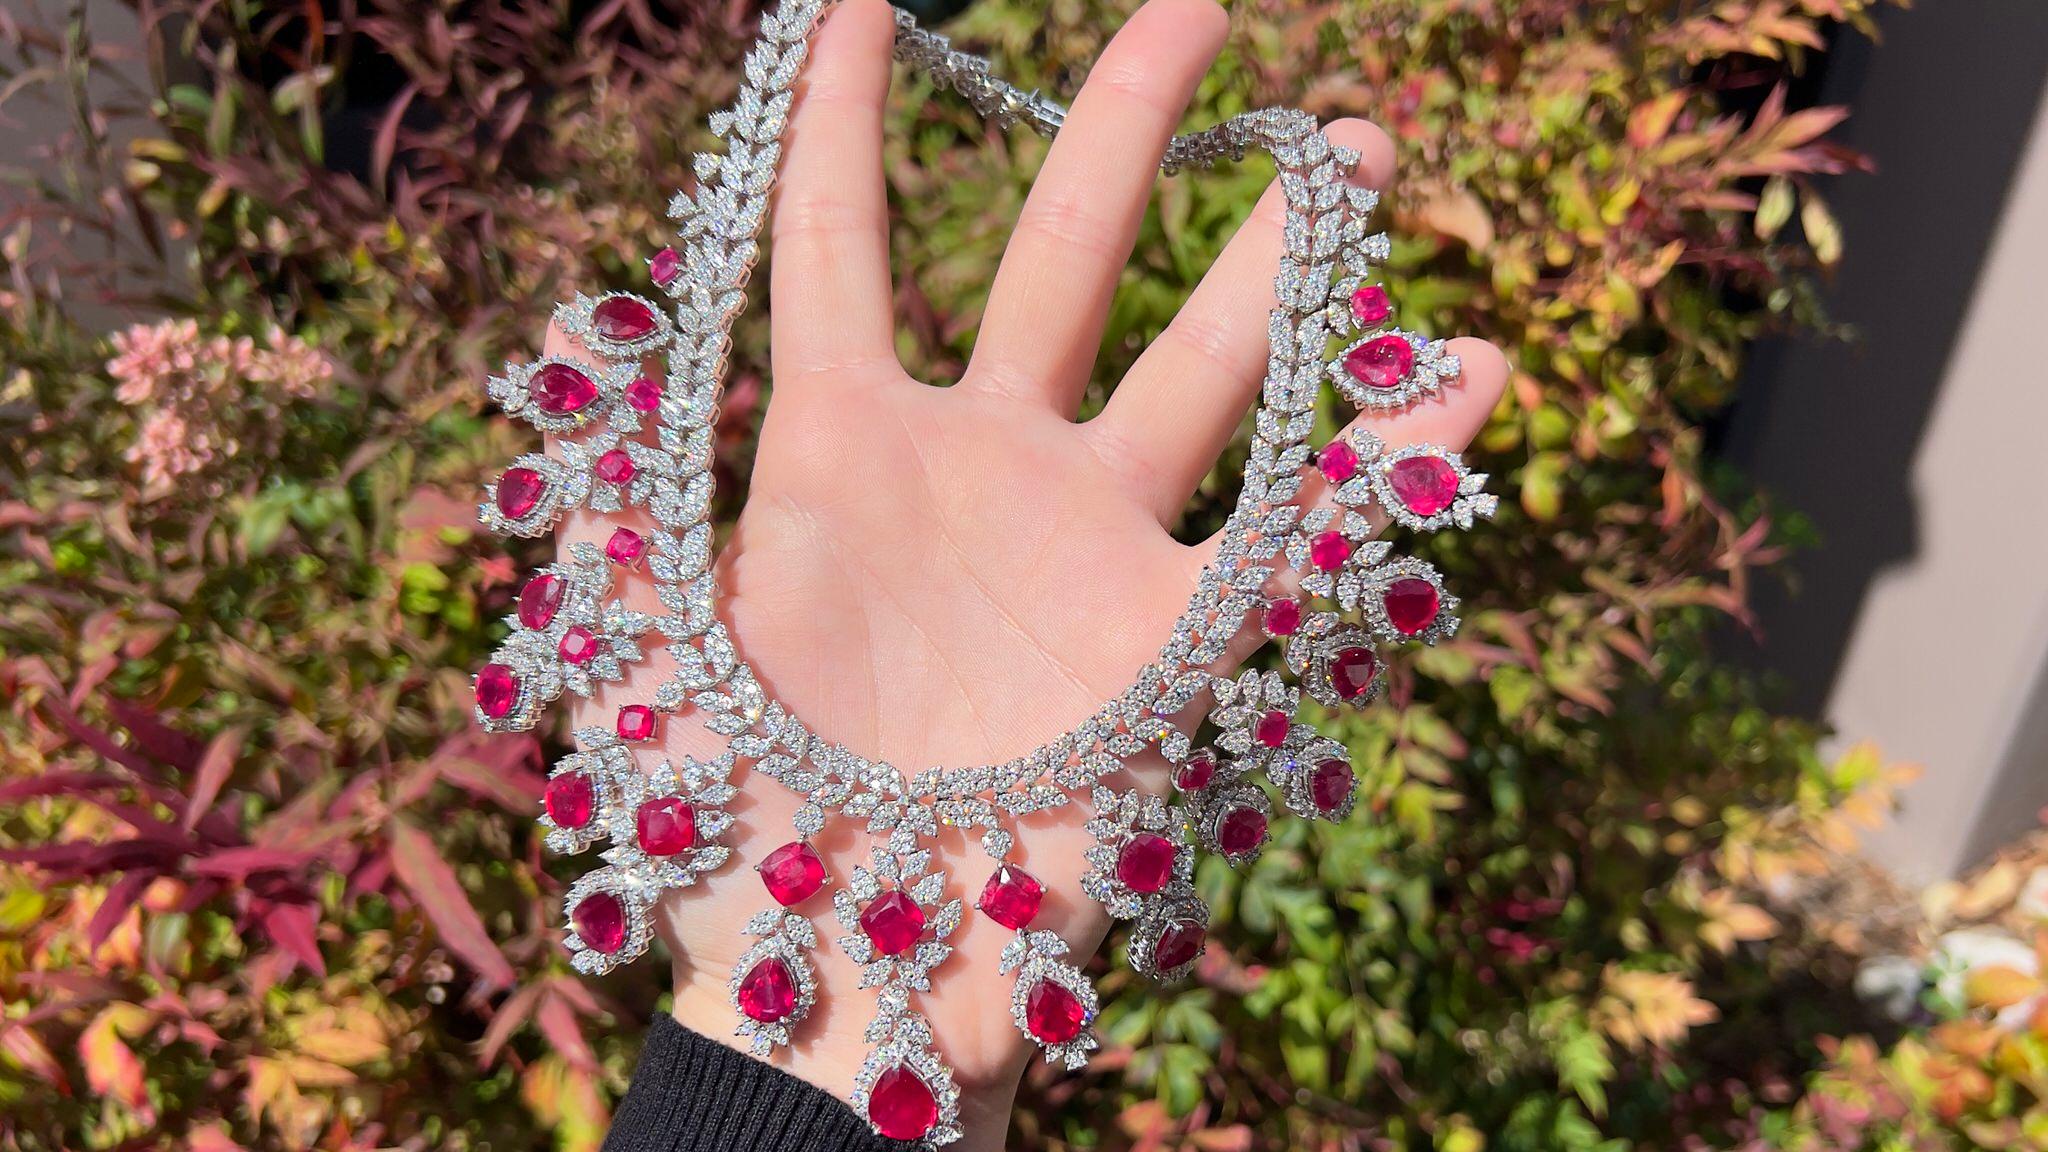 Art Deco Very Fine Ruby Necklace Set With Diamonds 115 Carats Total 18K Gold For Sale